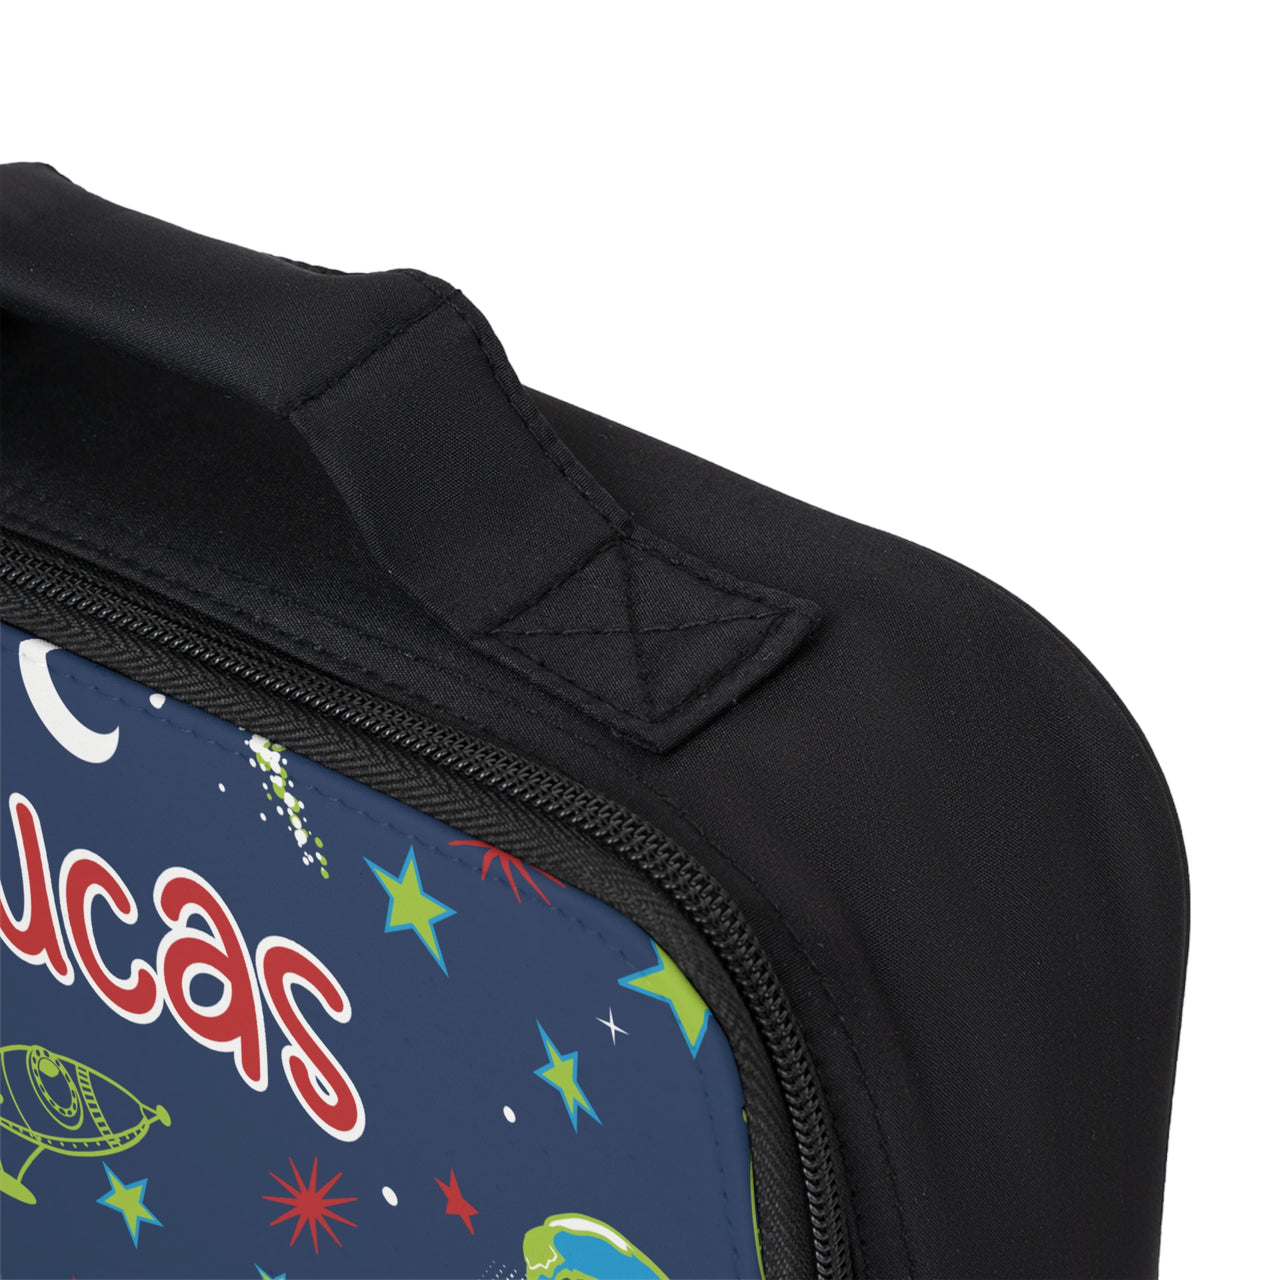 Personalized Boys Space Ships Kids Lunch Bag - CHILD DECOR LLC